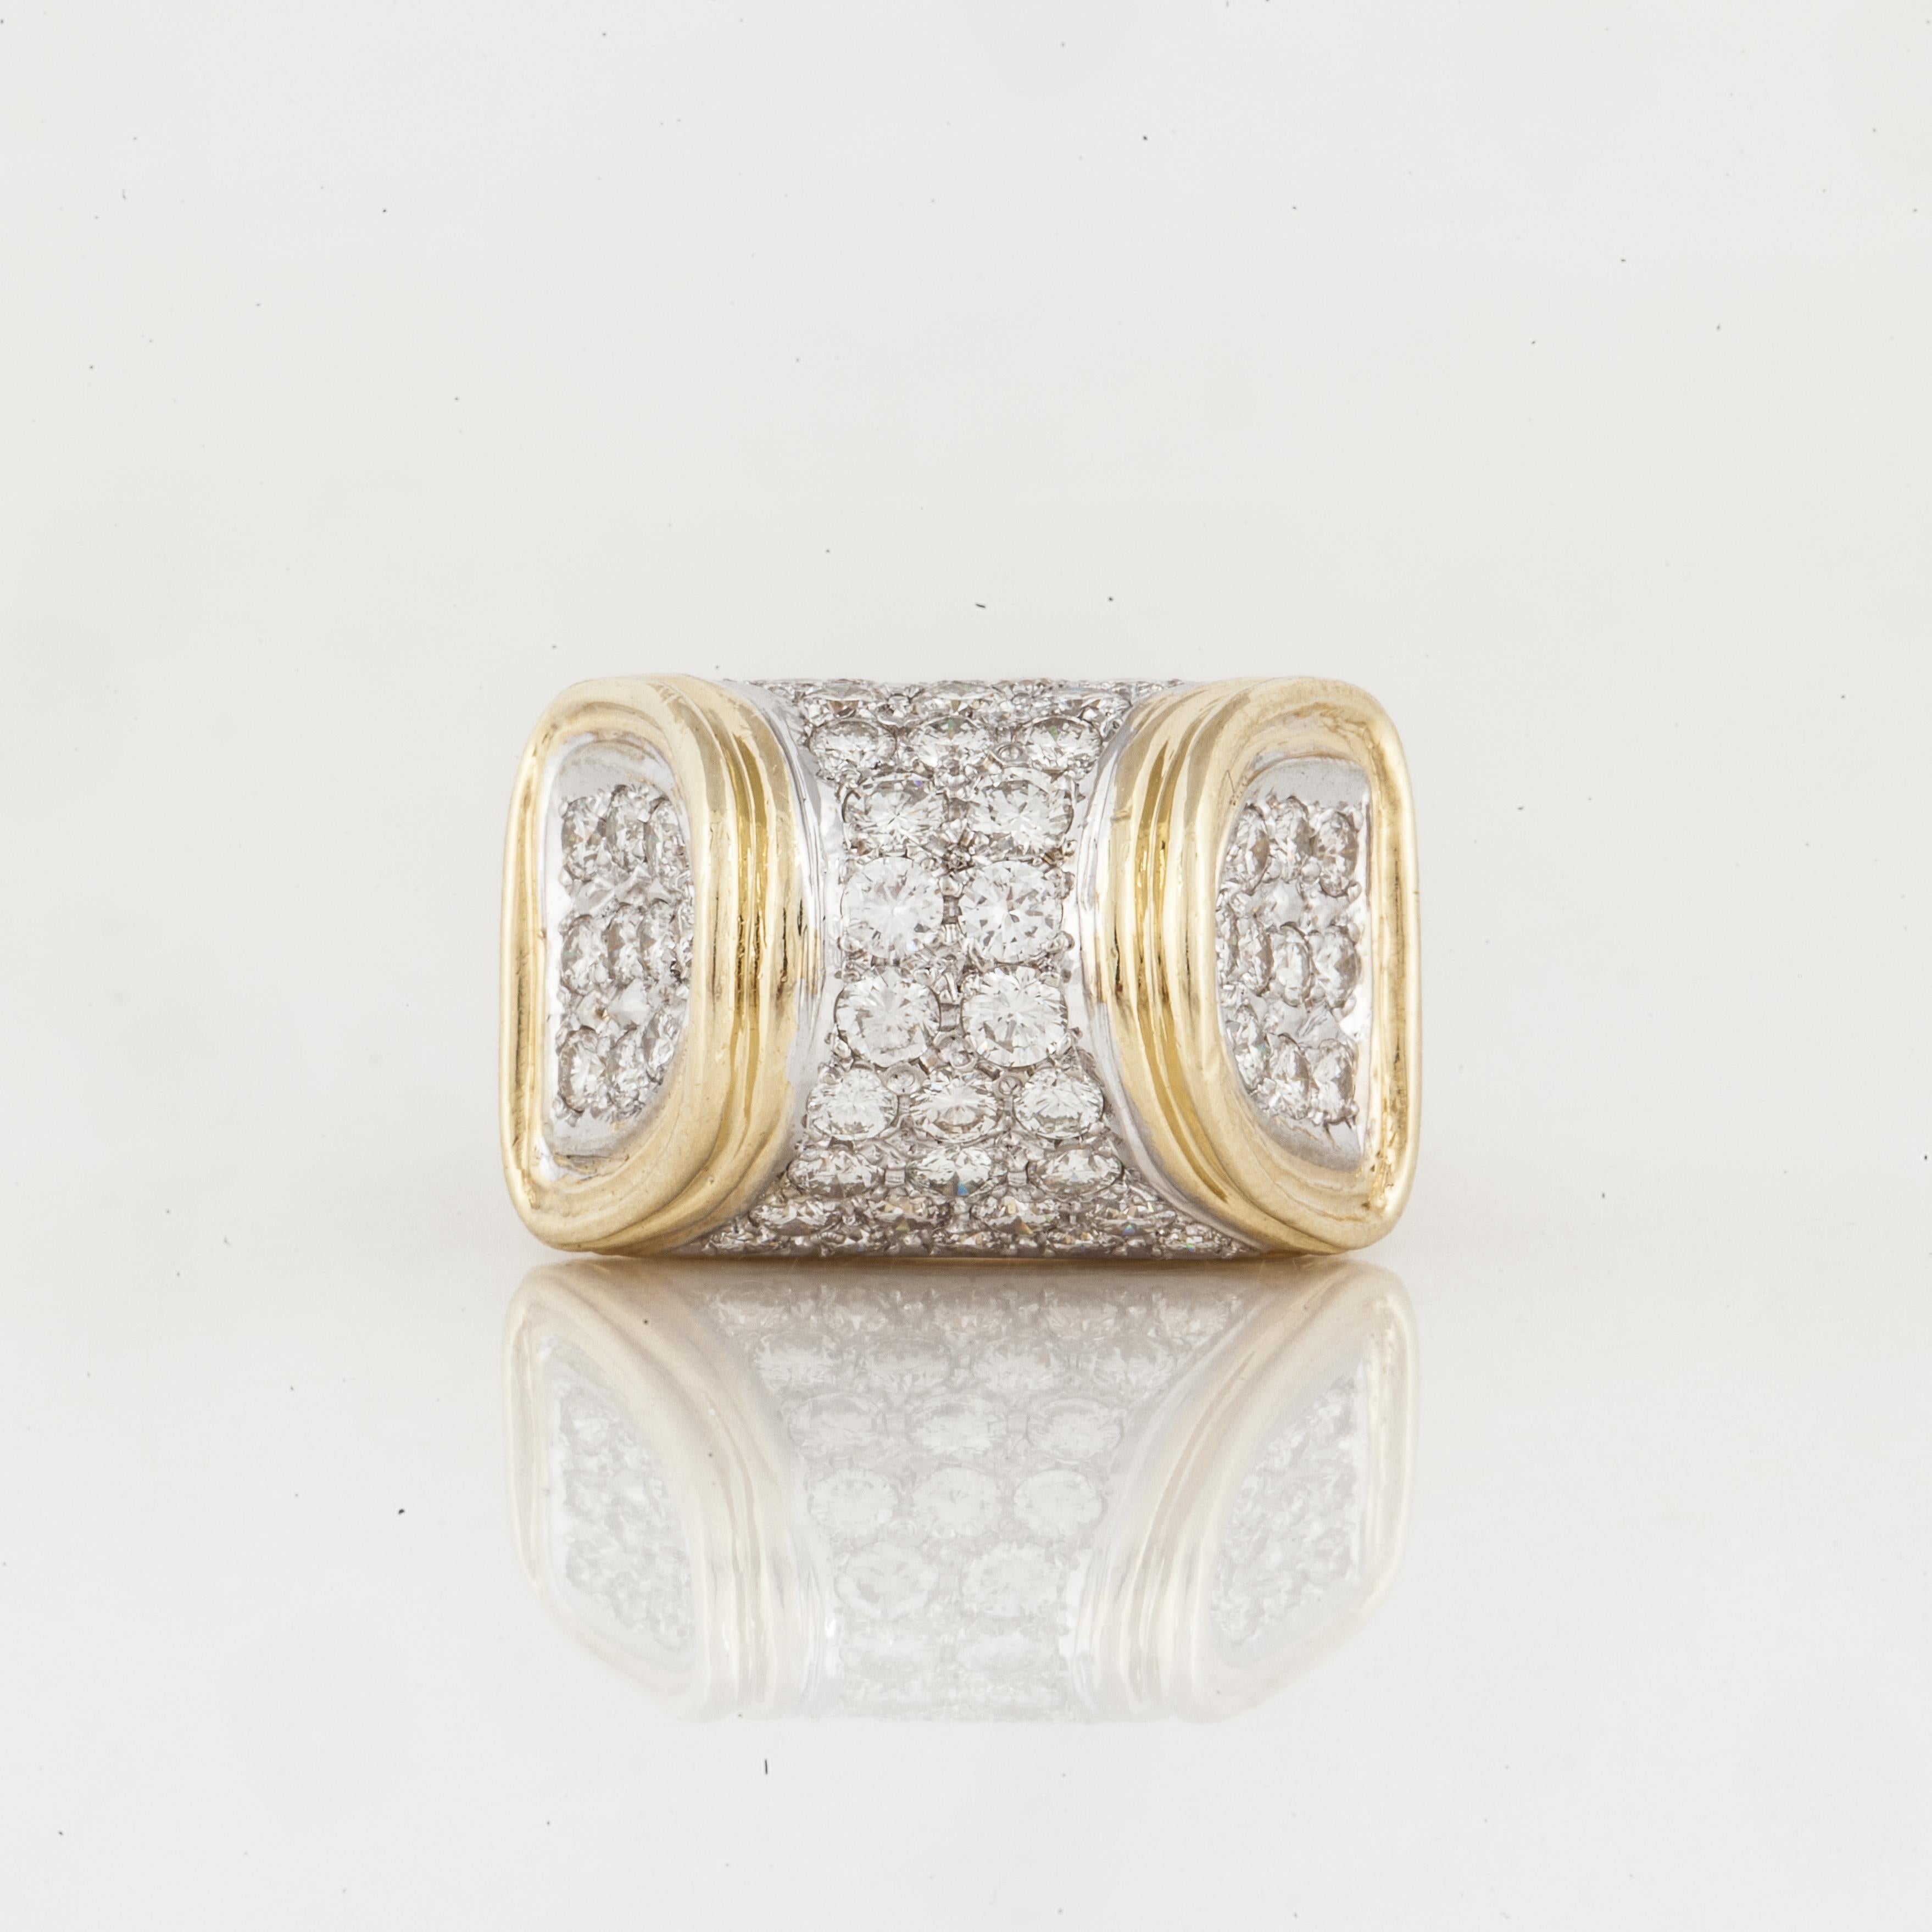 18K yellow gold ring with pavé diamonds.  It features 56 round diamonds with a total carat weight of 4.50; G-H color and VVS2-VS1 clarity.  Measures 15/16 inches long, 5/8 inches wide and stands 5/8 inches off the finger.